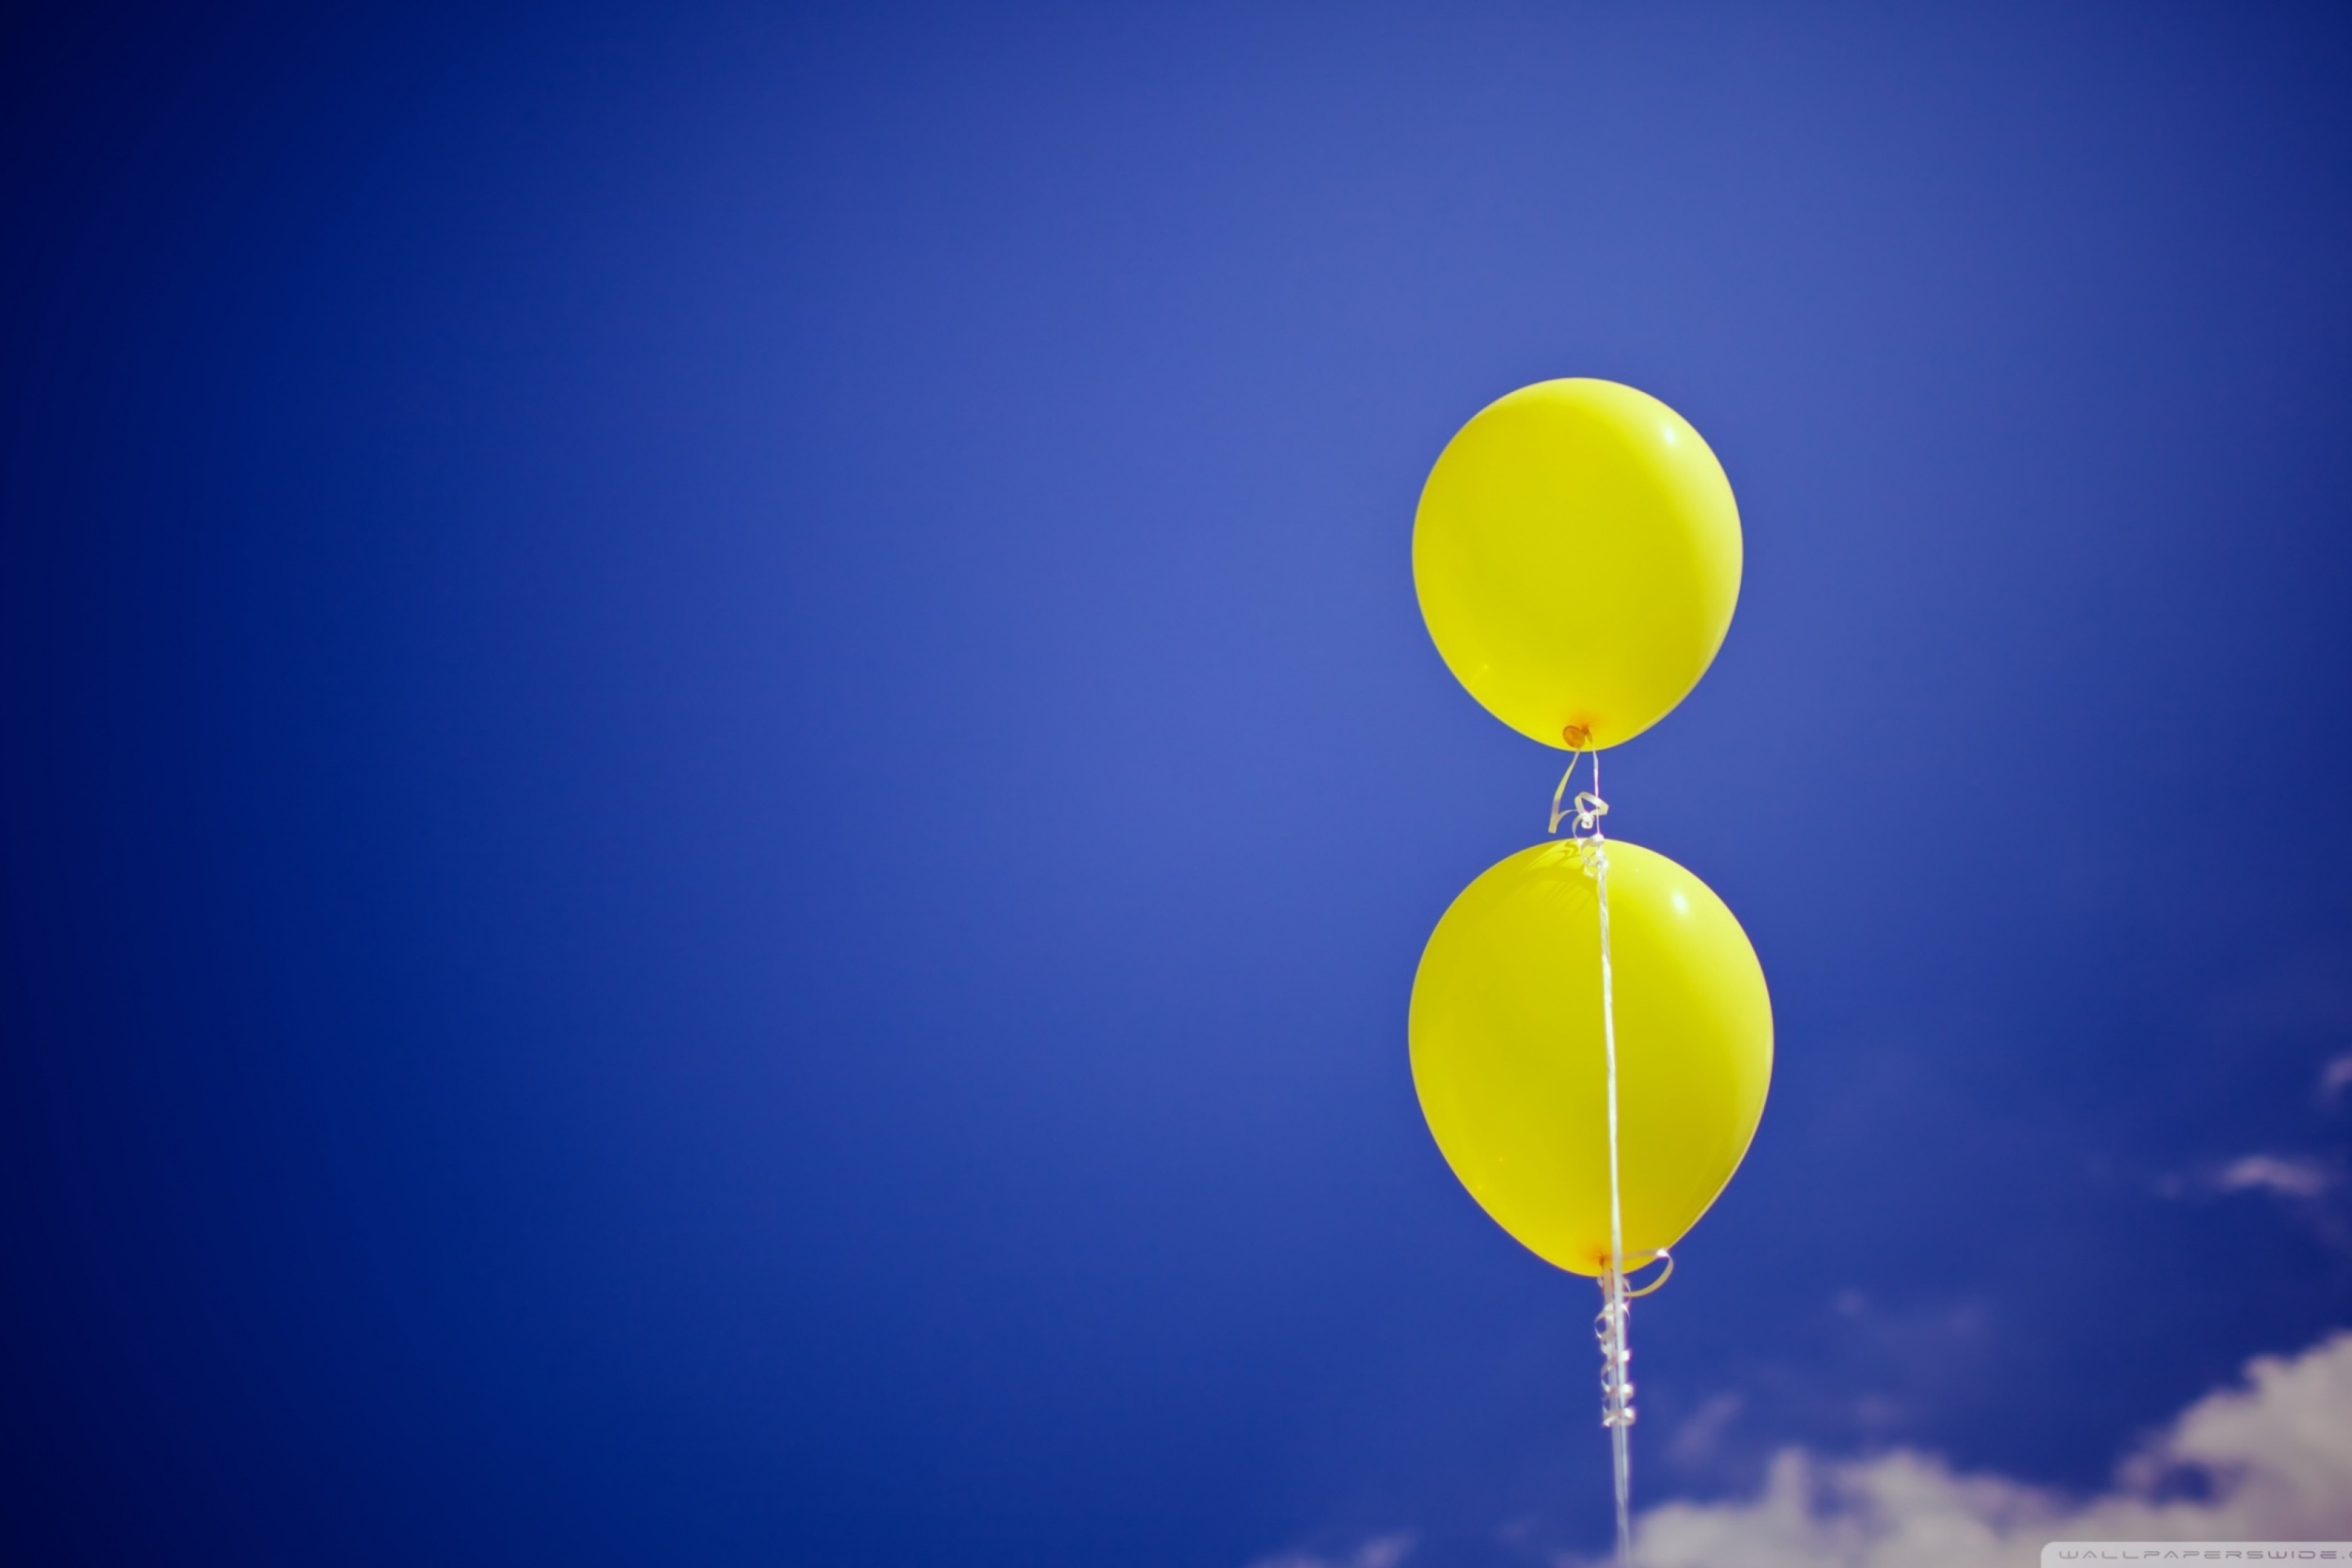 Yellow Balloons In The Blue Sky wallpaper 2880x1920